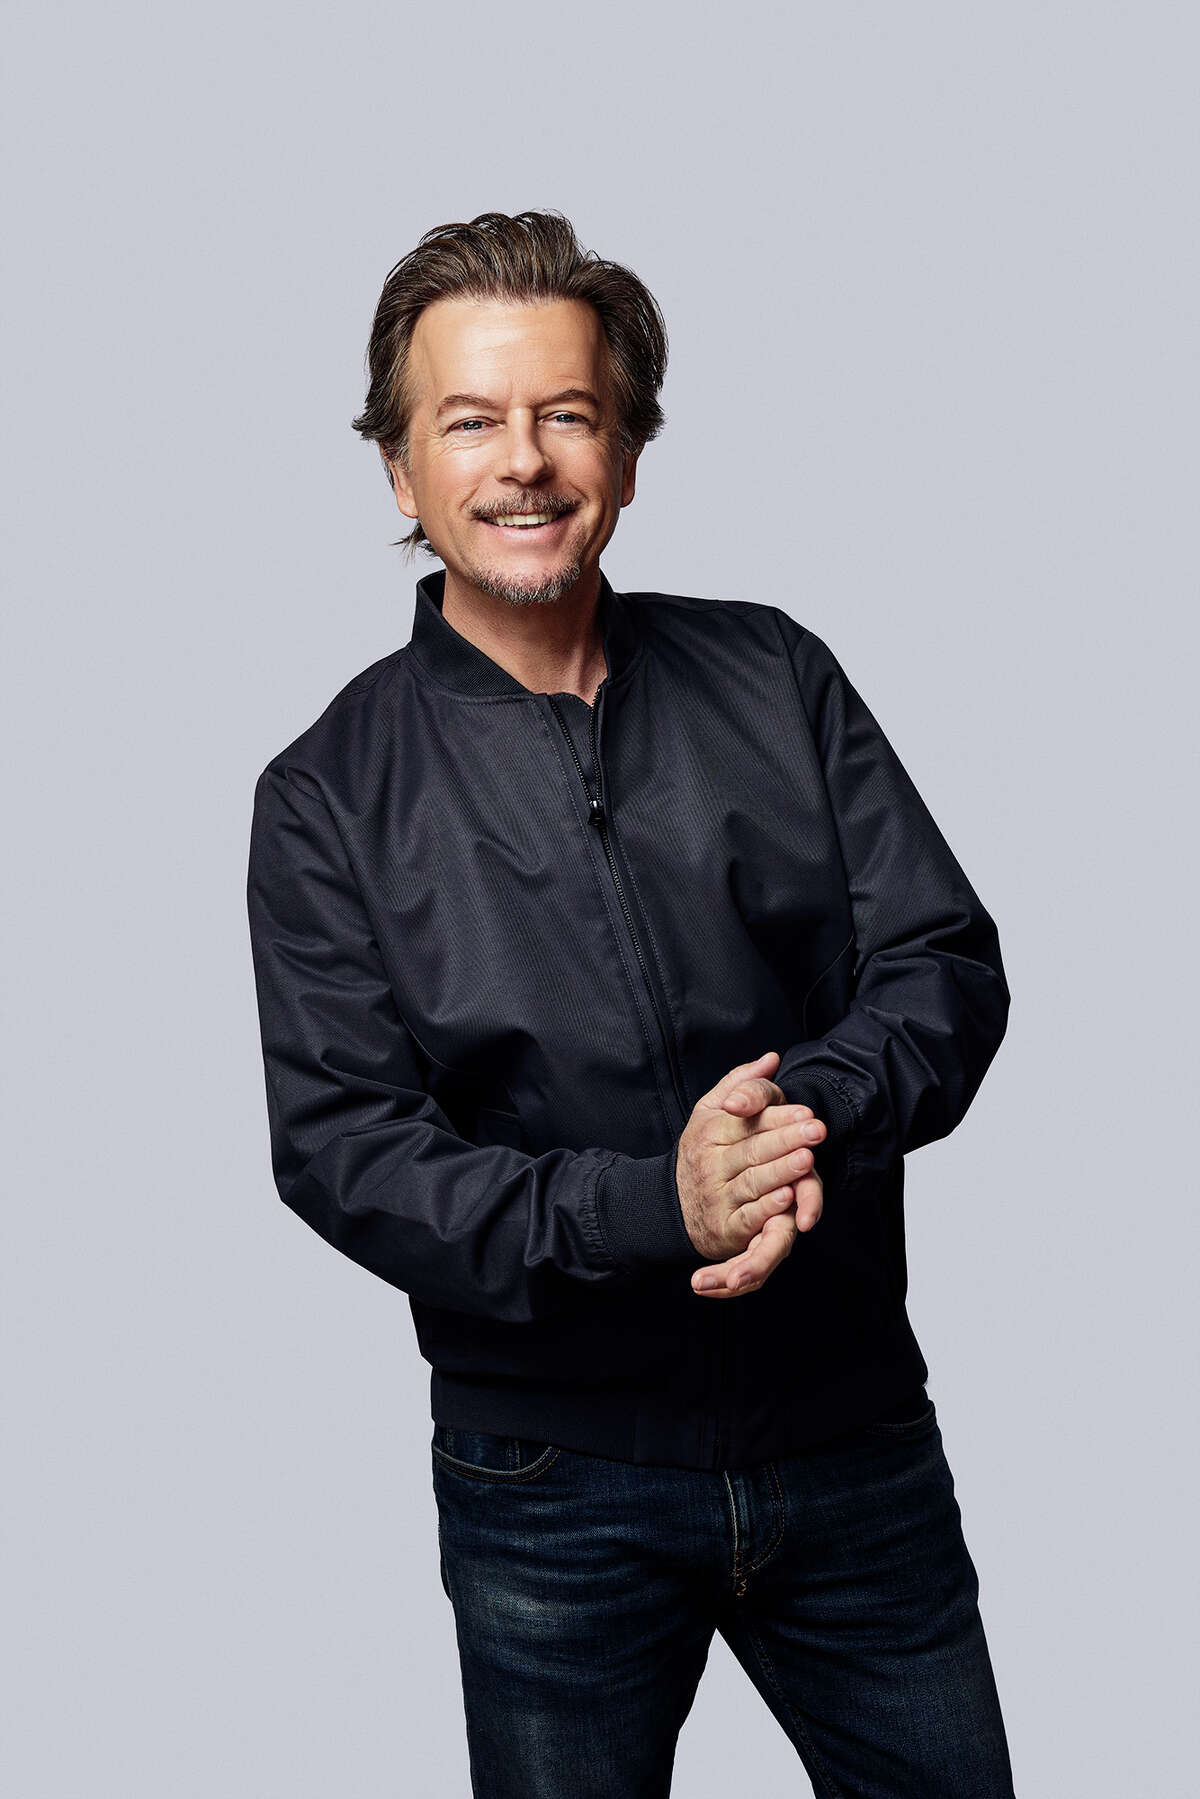 David Spade is bringing his stand-up act to the Majestic Theatre.